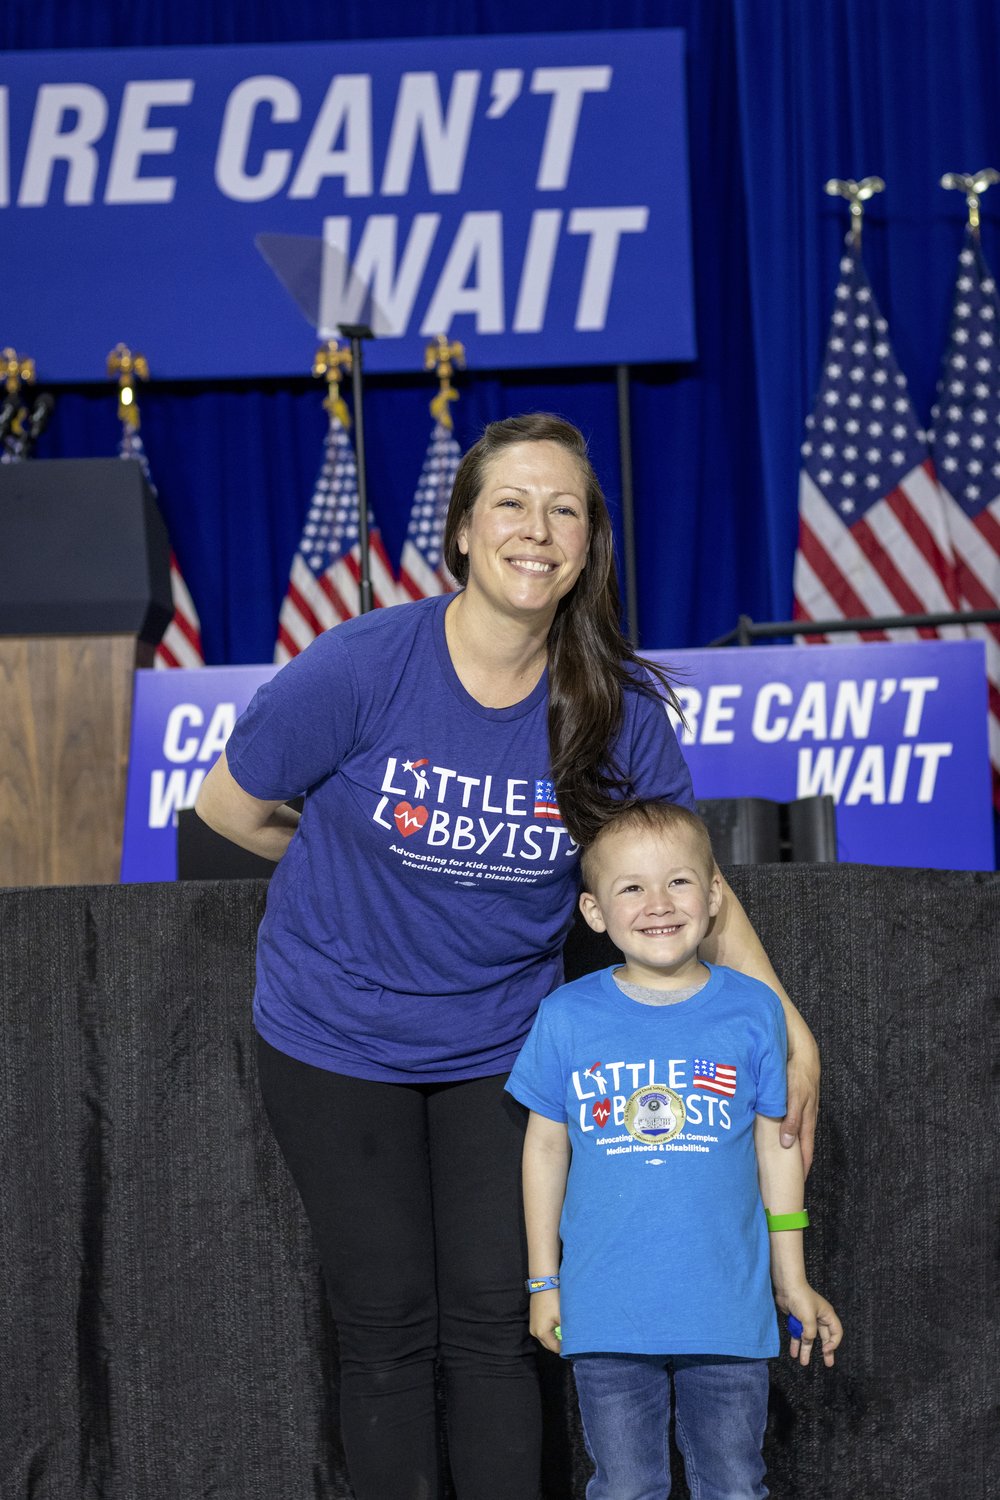  Megan and her young son Gabe pose in front of the stage. 